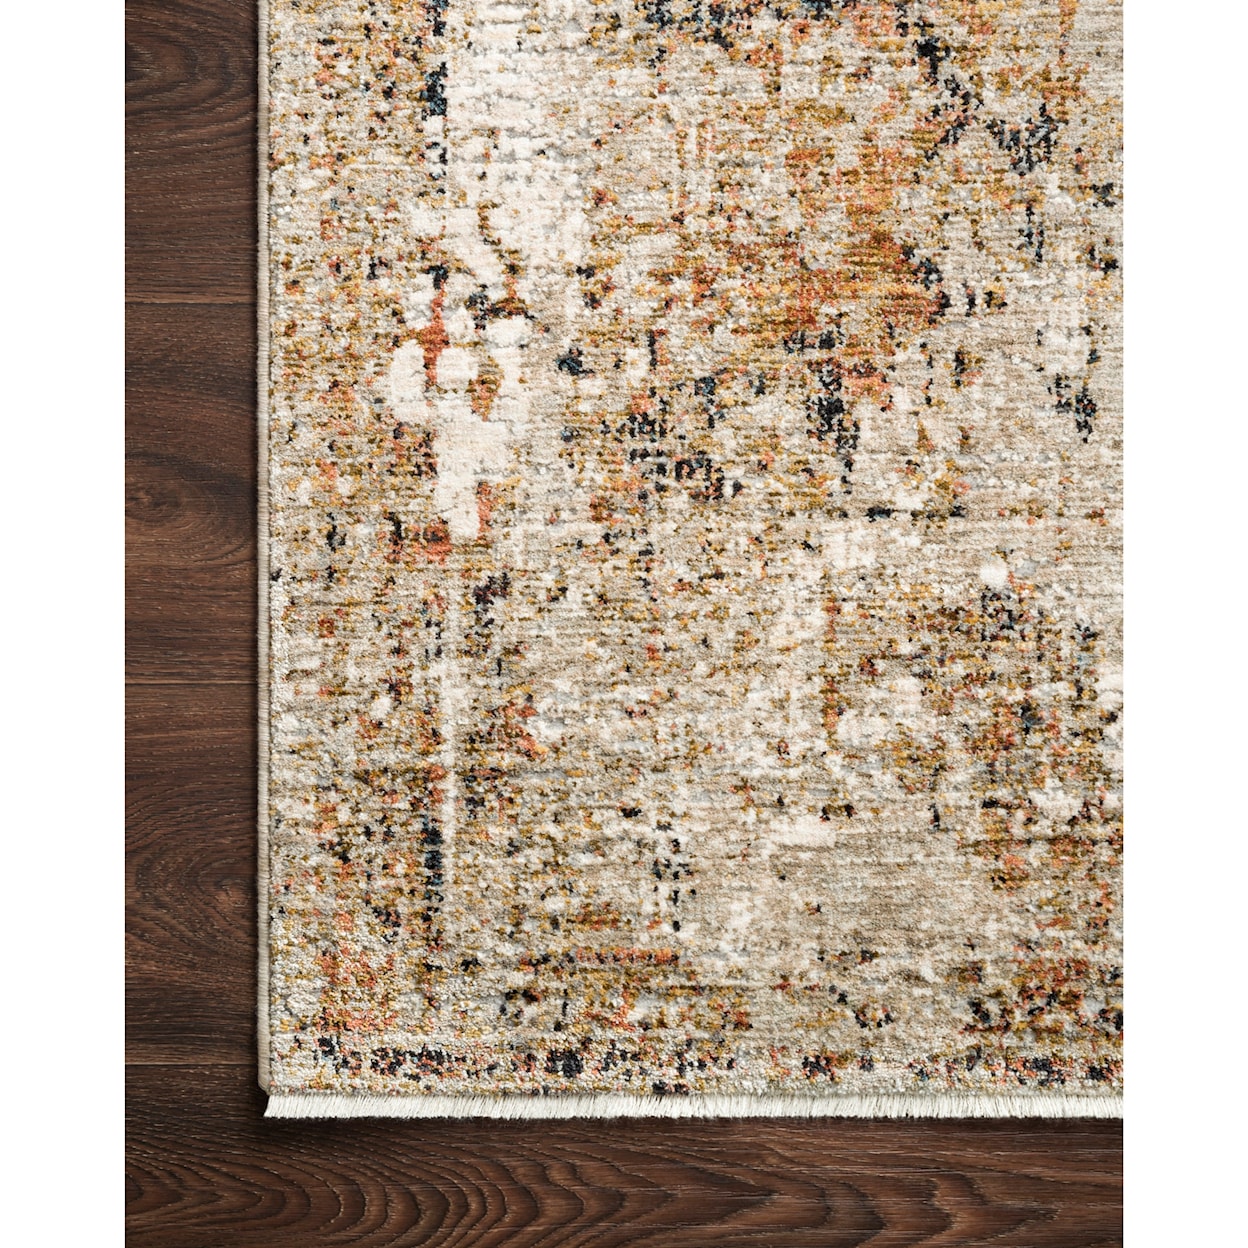 Loloi Rugs Theia 5'0" x 8'0" Taupe / Gold Rug